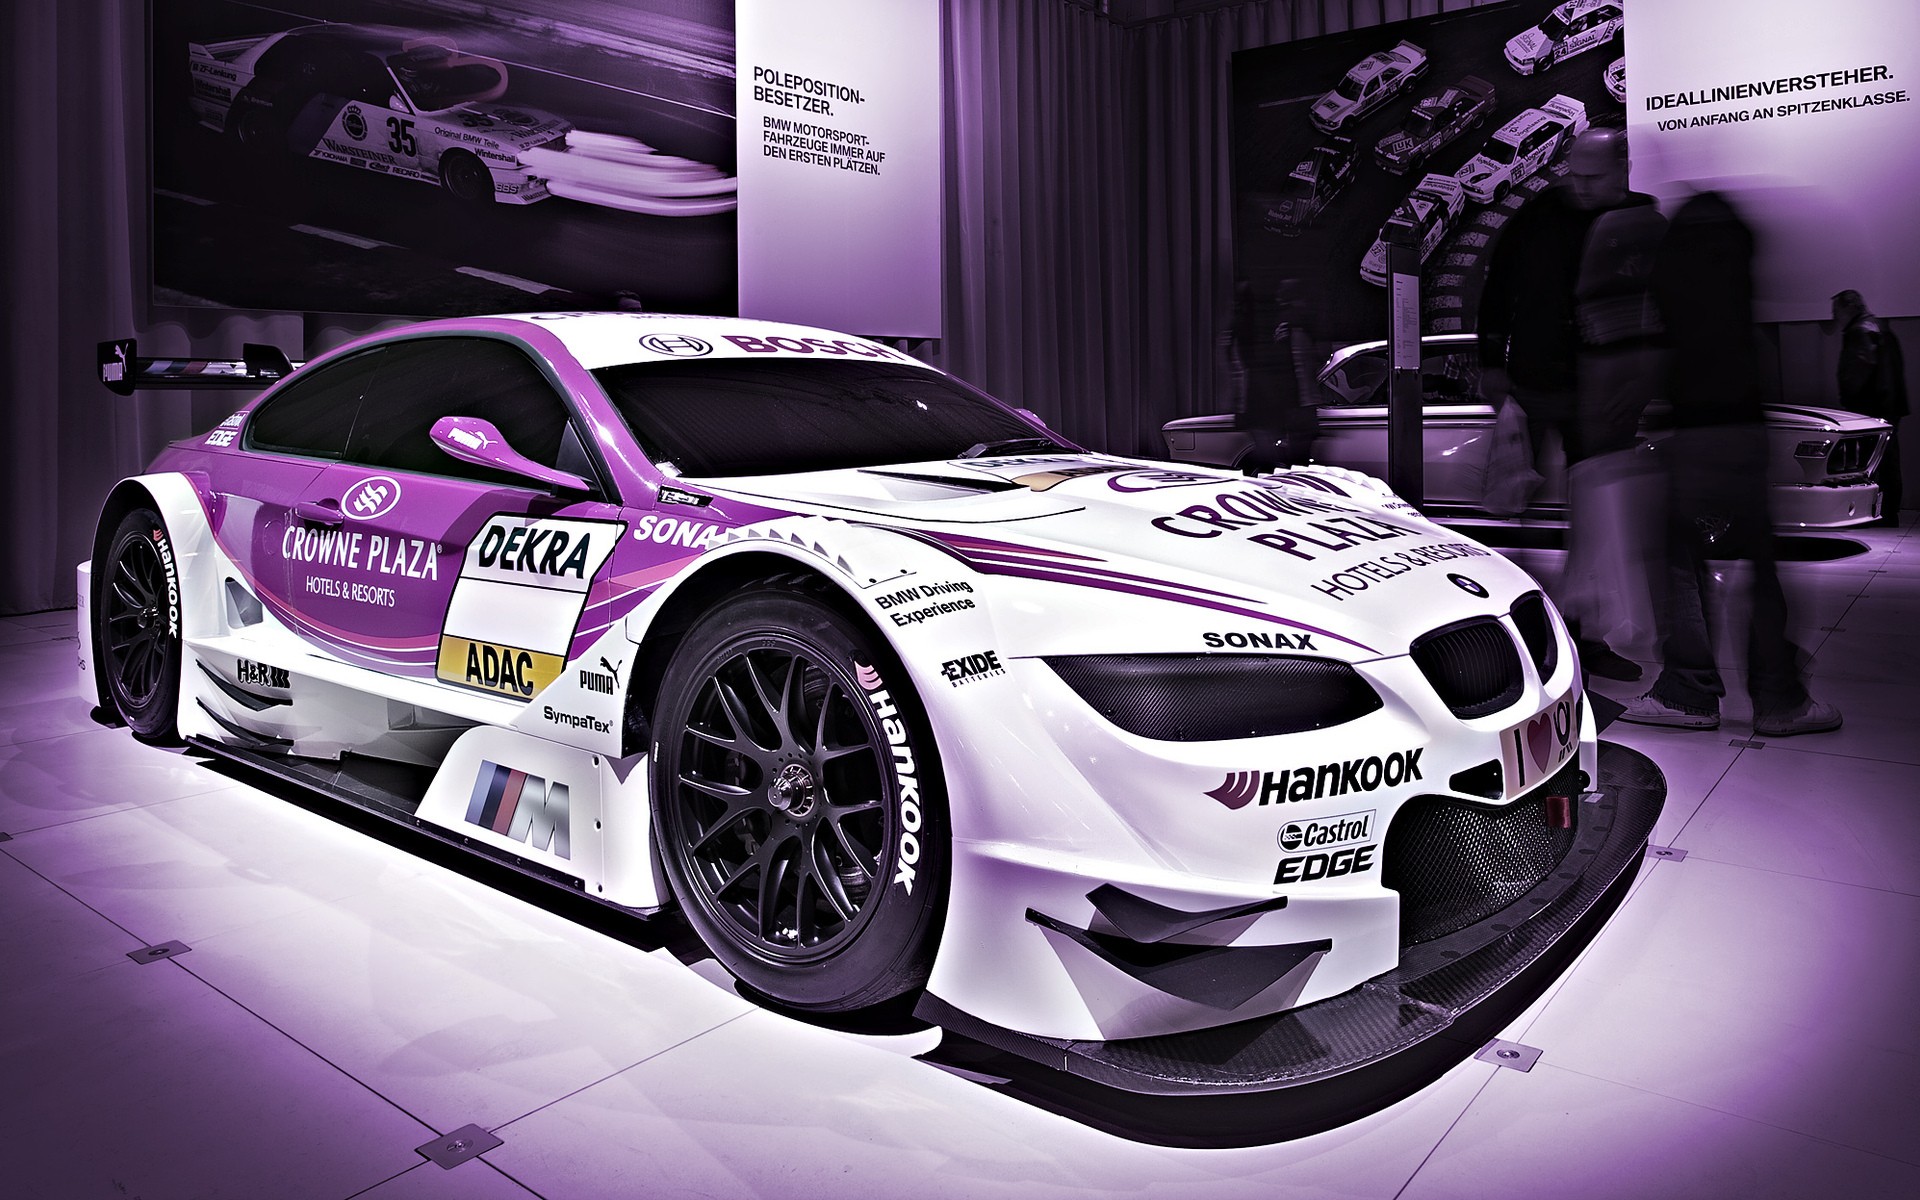 General 1920x1200 car vehicle white cars race cars BMW livery